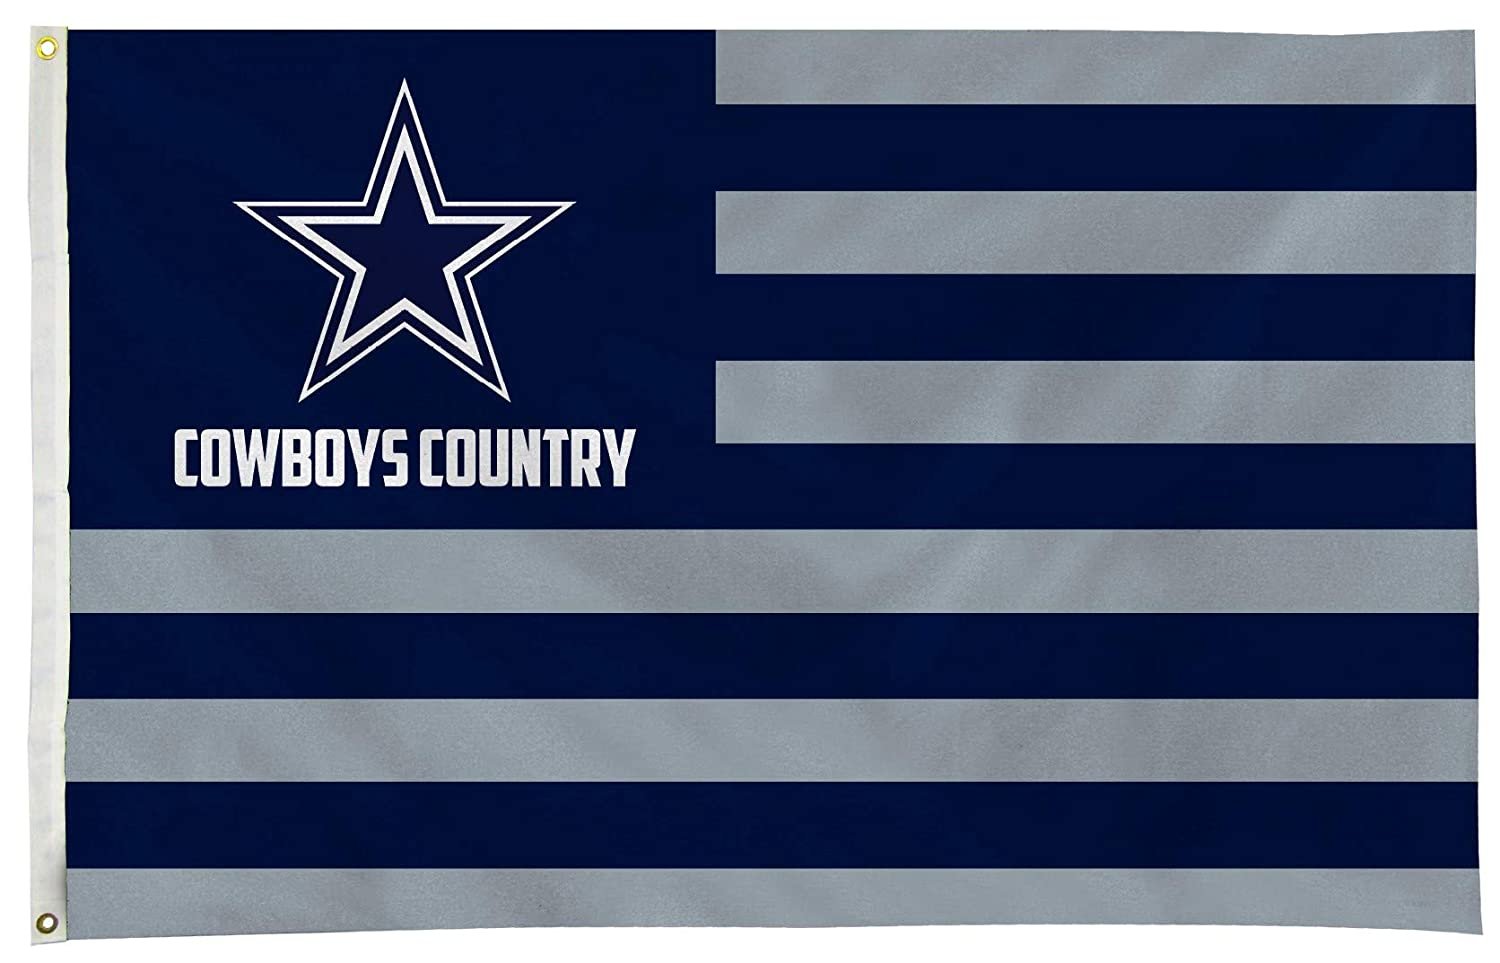 Dallas Cowboys Flag Banner 3x5 Country Design Premium with Metal Grommets Outdoor House Football